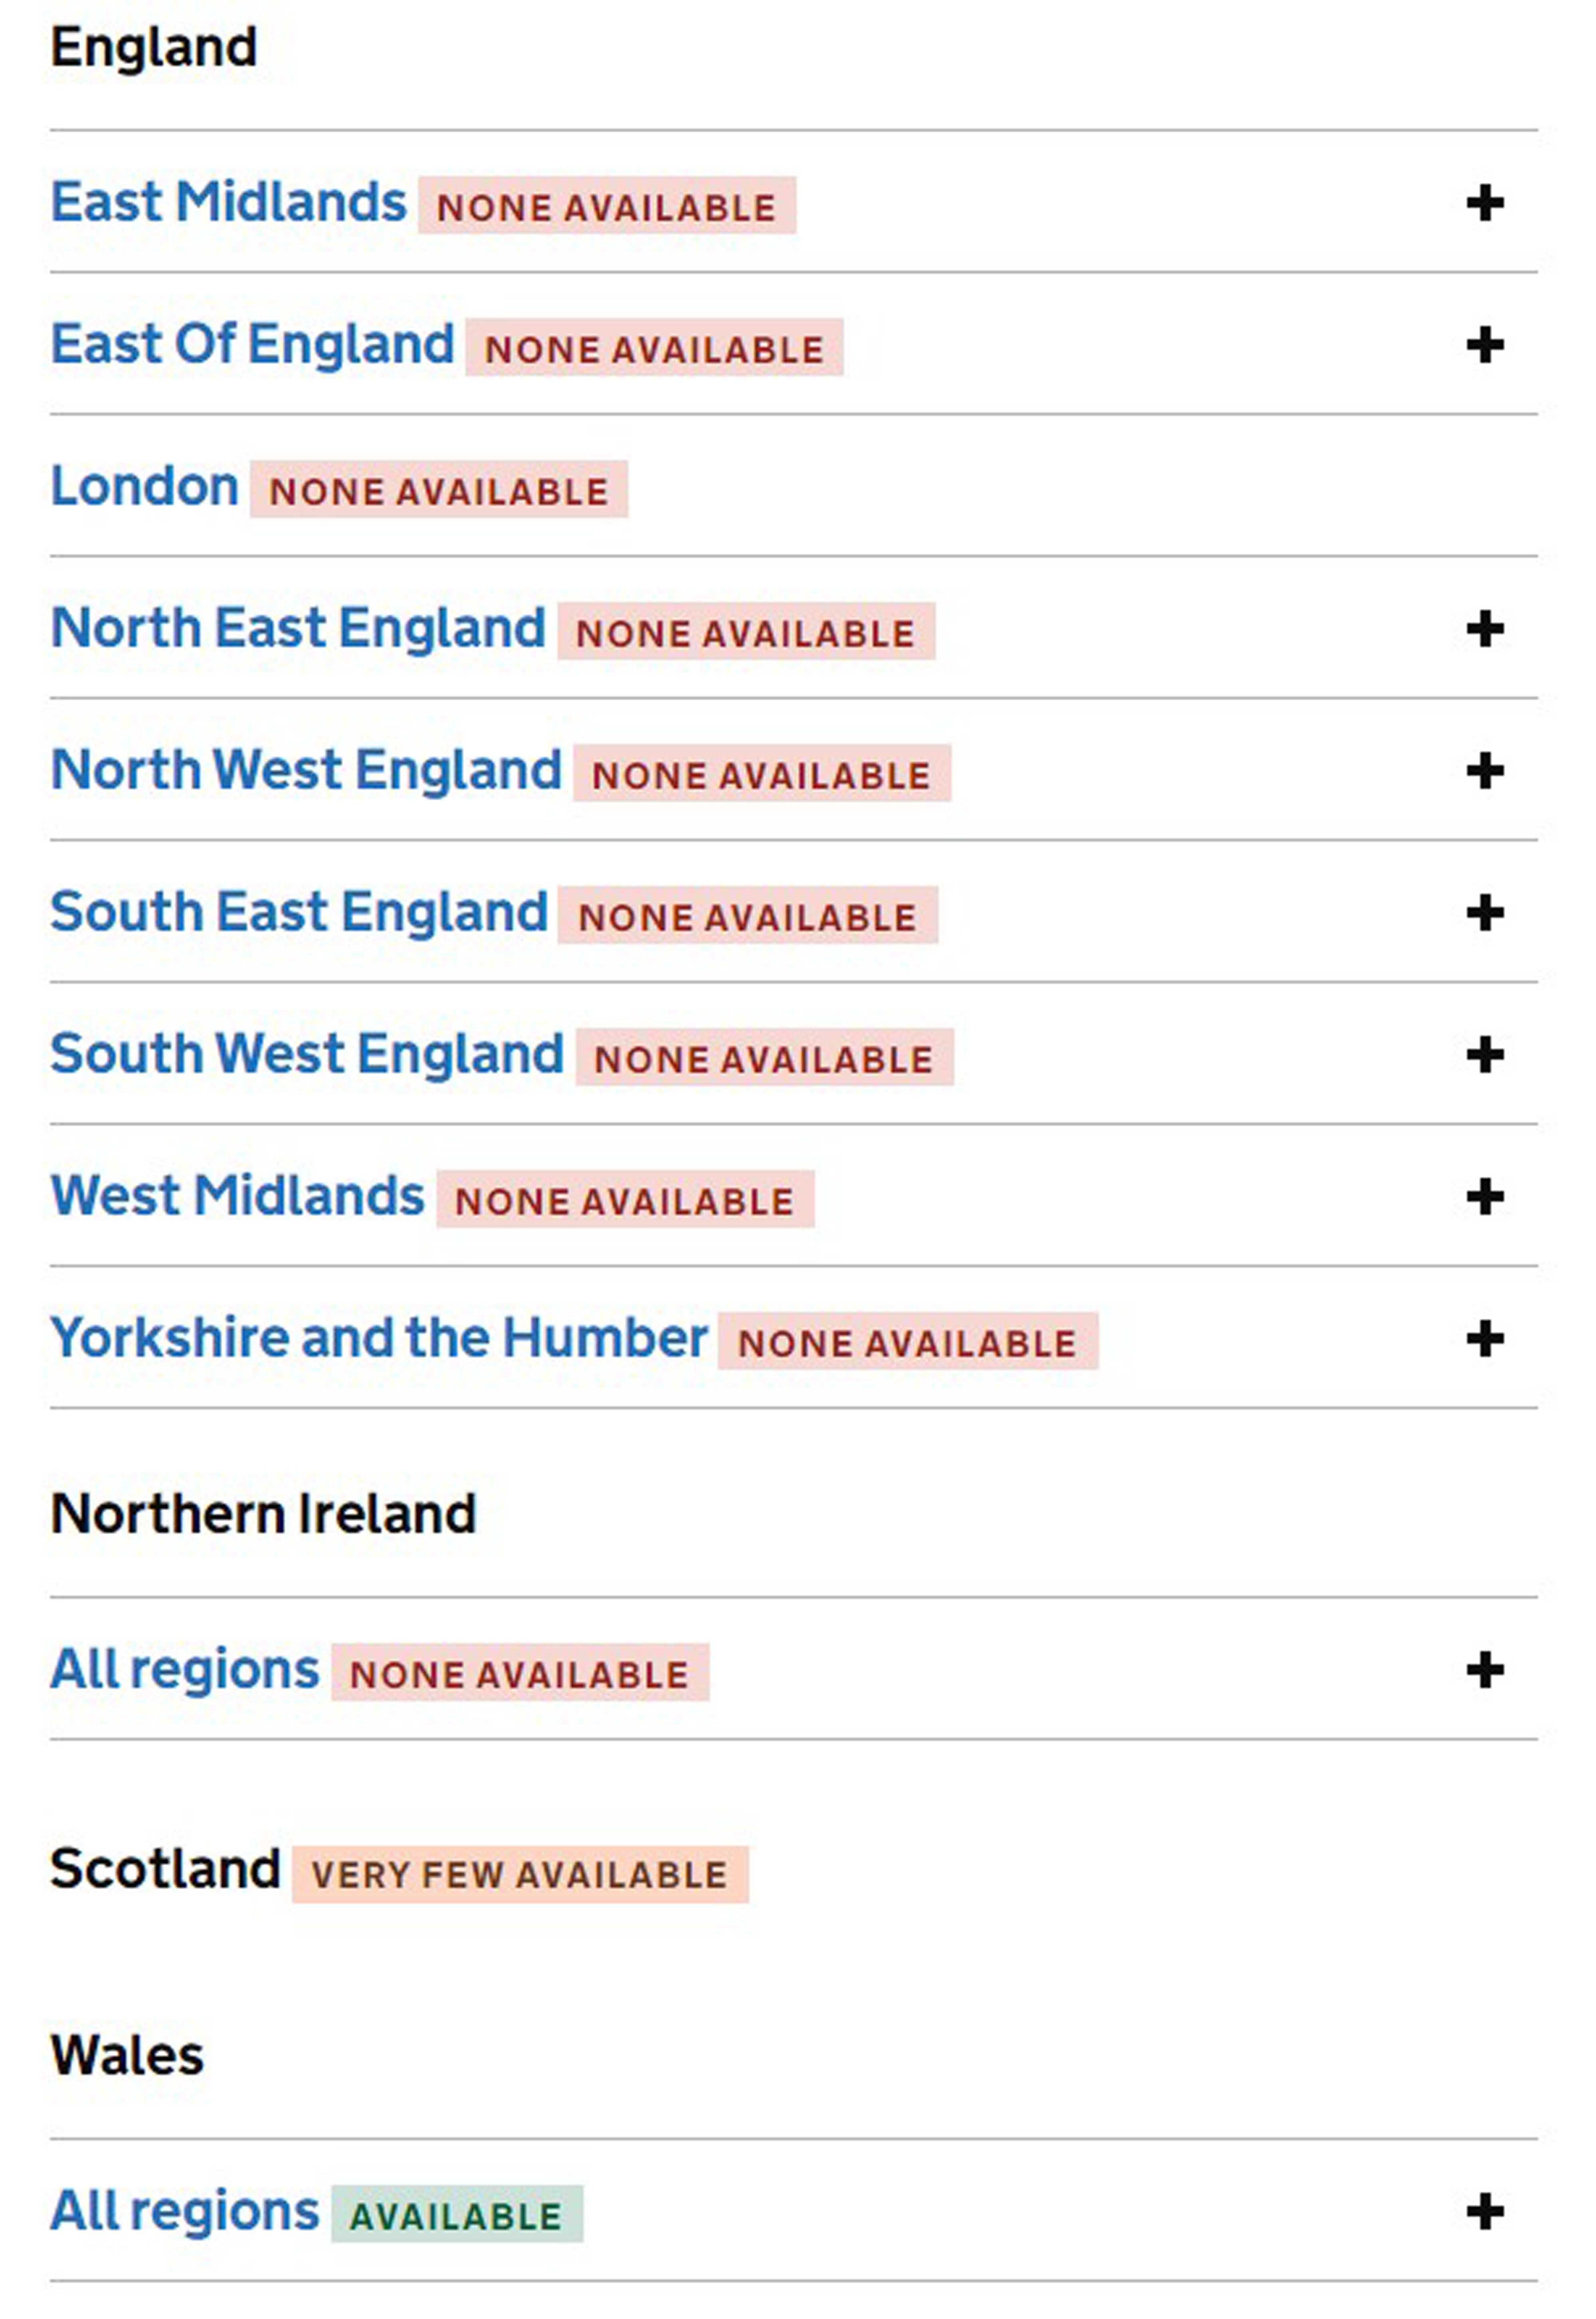 (Screengrab from the UK Government website)